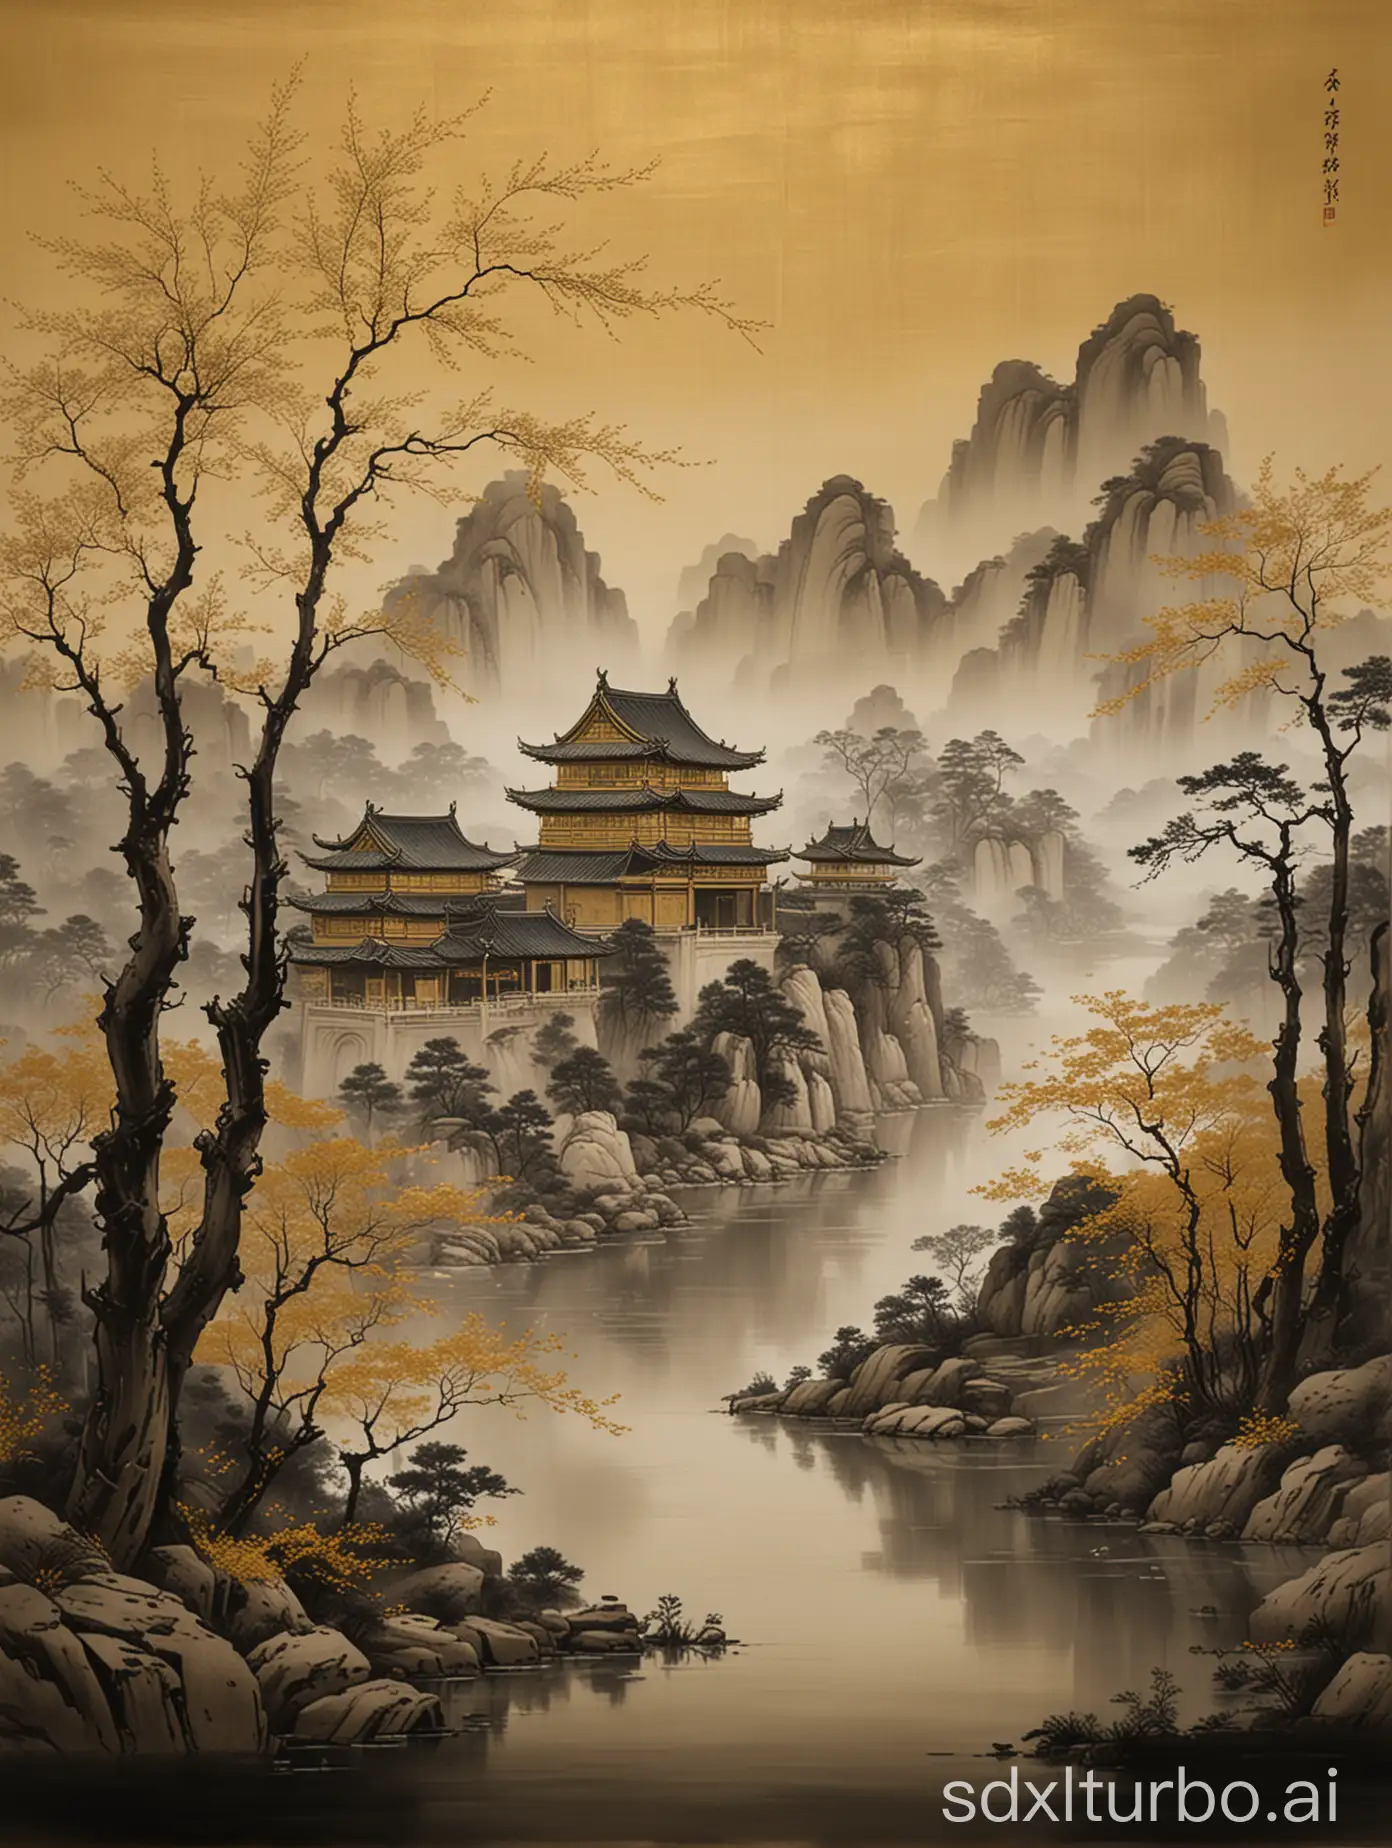 The minimalist style, prints, an ancient Landscape painting, depicts a poetic, invisible Chinese architecture, In the foreground of the long scroll, the buildings are highlighted in gold. No other mixed colors were added to the building. Against a matte black background. Trees and emperors adorn heaven